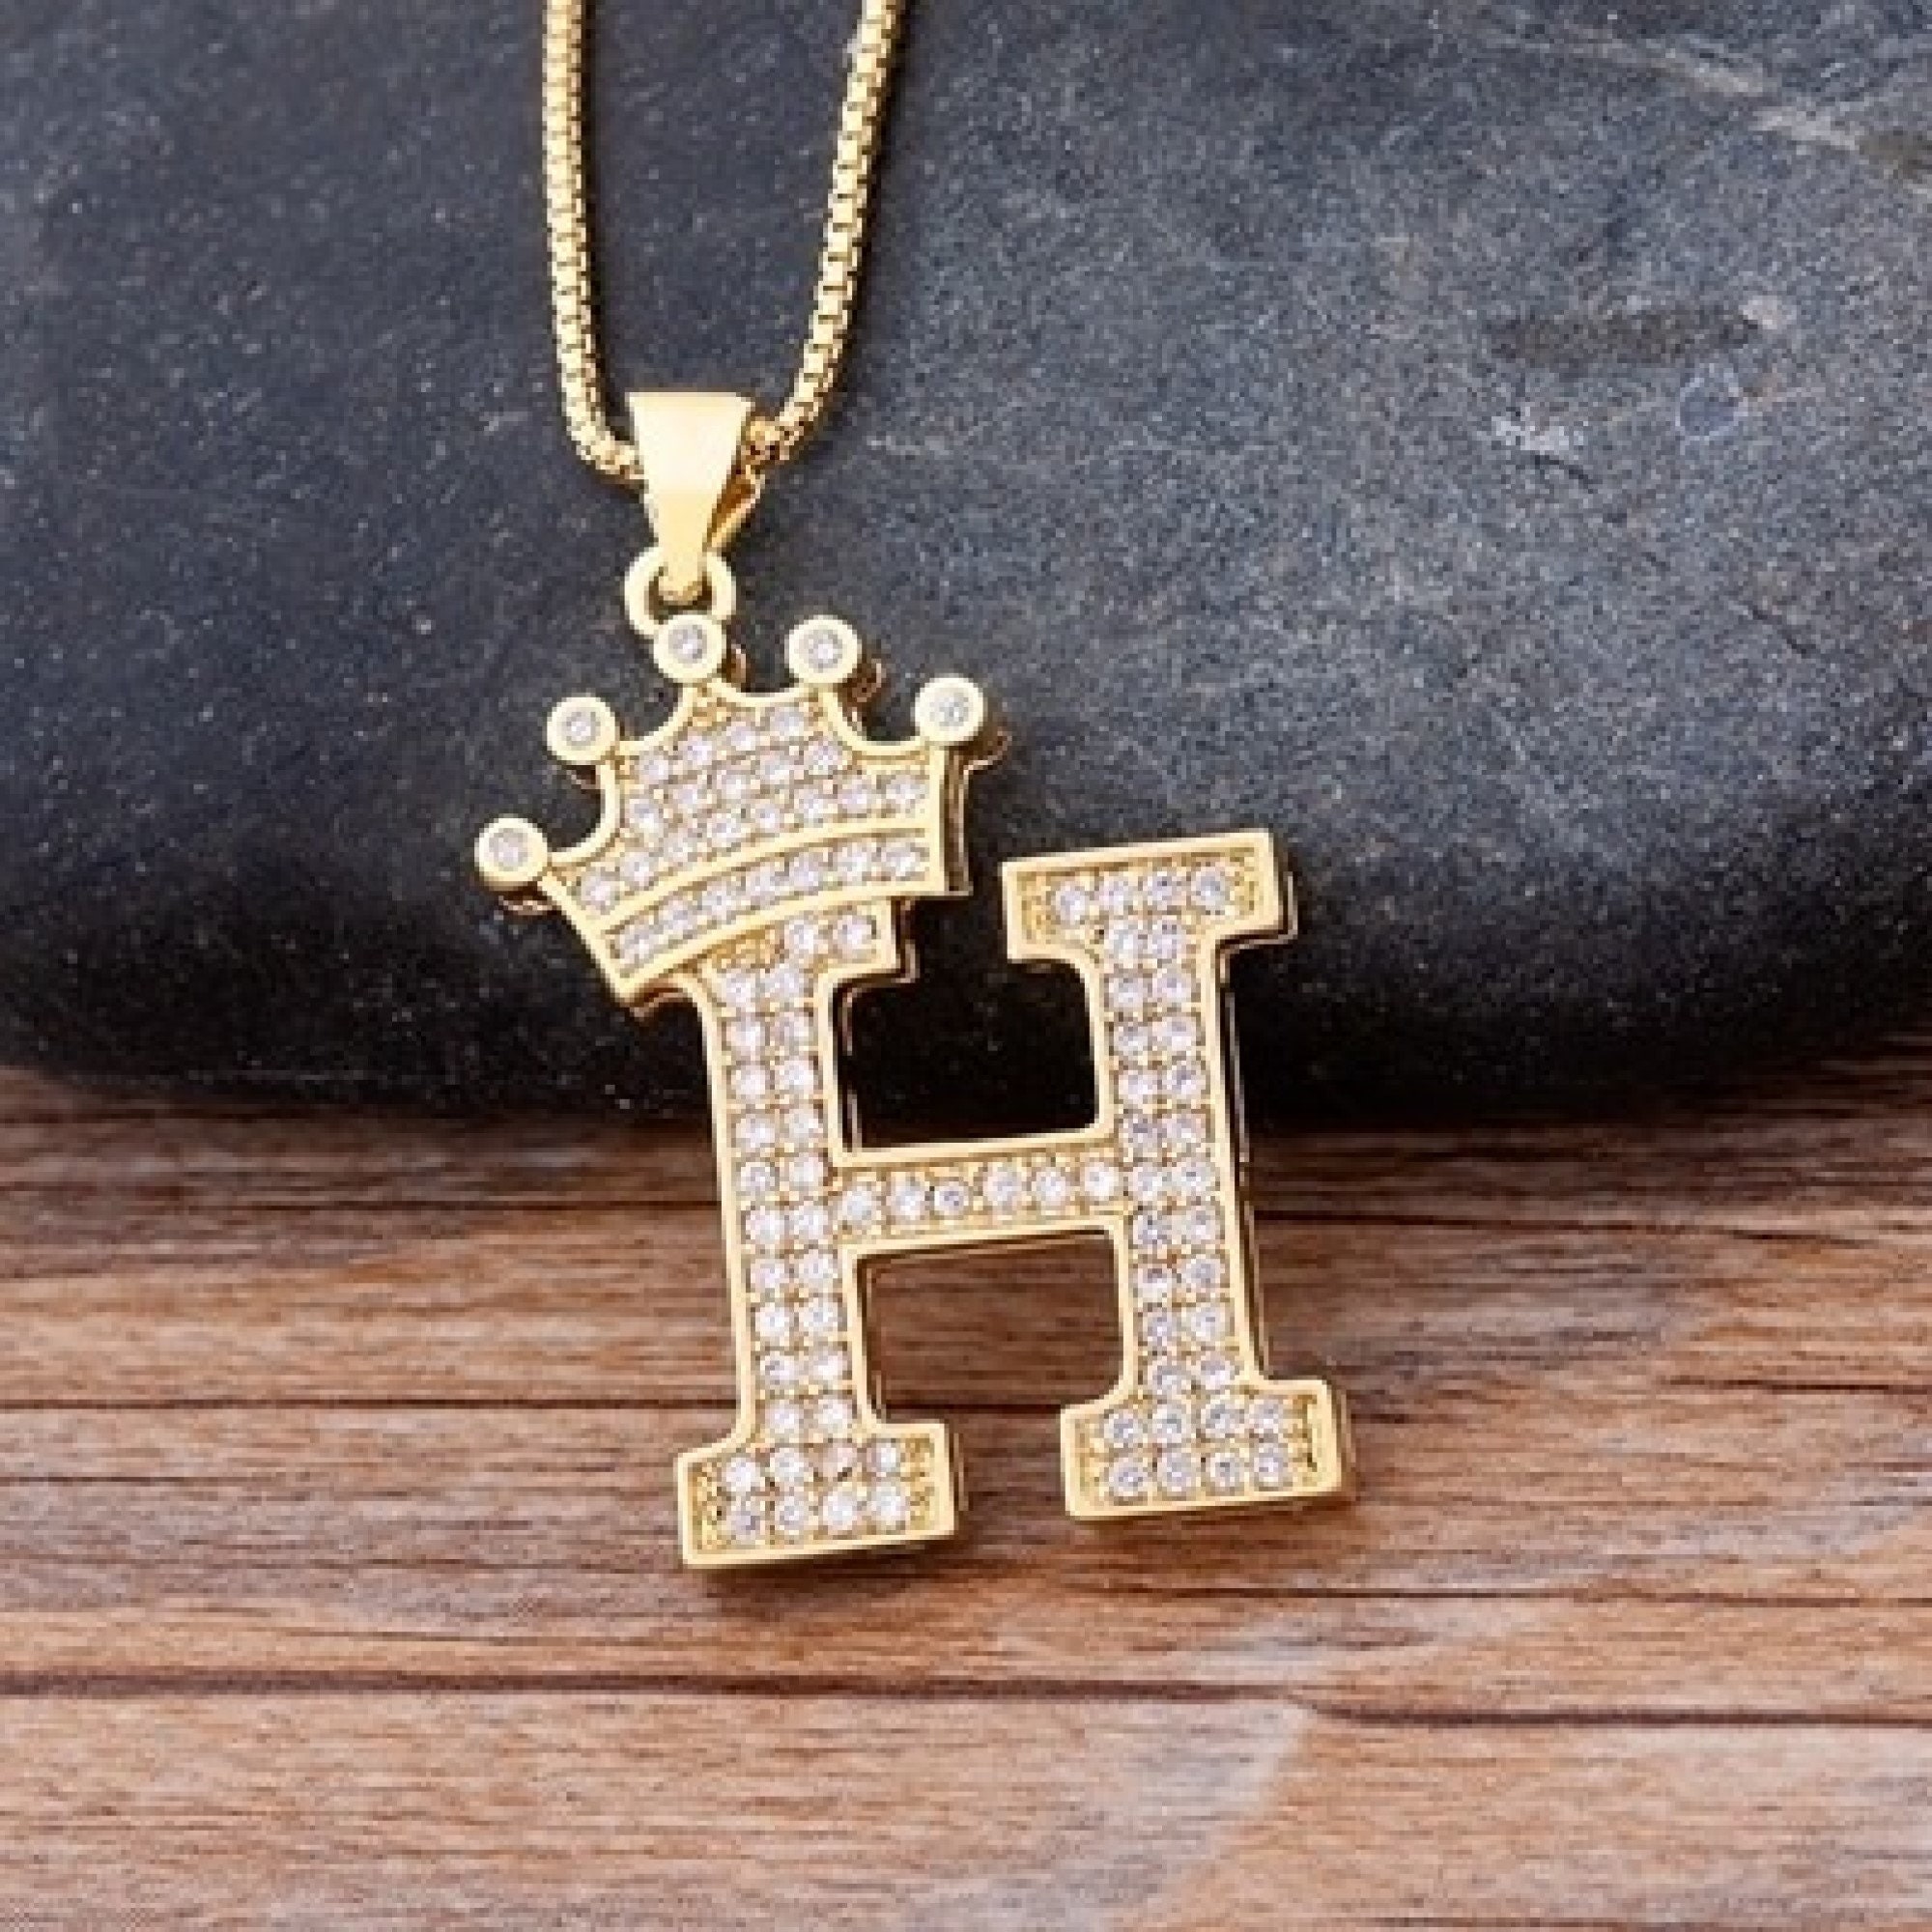 European And American Popular Street Style Pendant Accessories, Crown And  Eazy Money Letter Design Pendant With Silver-plated/gold-plated And  Rhinestones On A Multi-chain 20inch Necklace, Suitable For Men, Women,  Children, Daily Parties, Fashionable